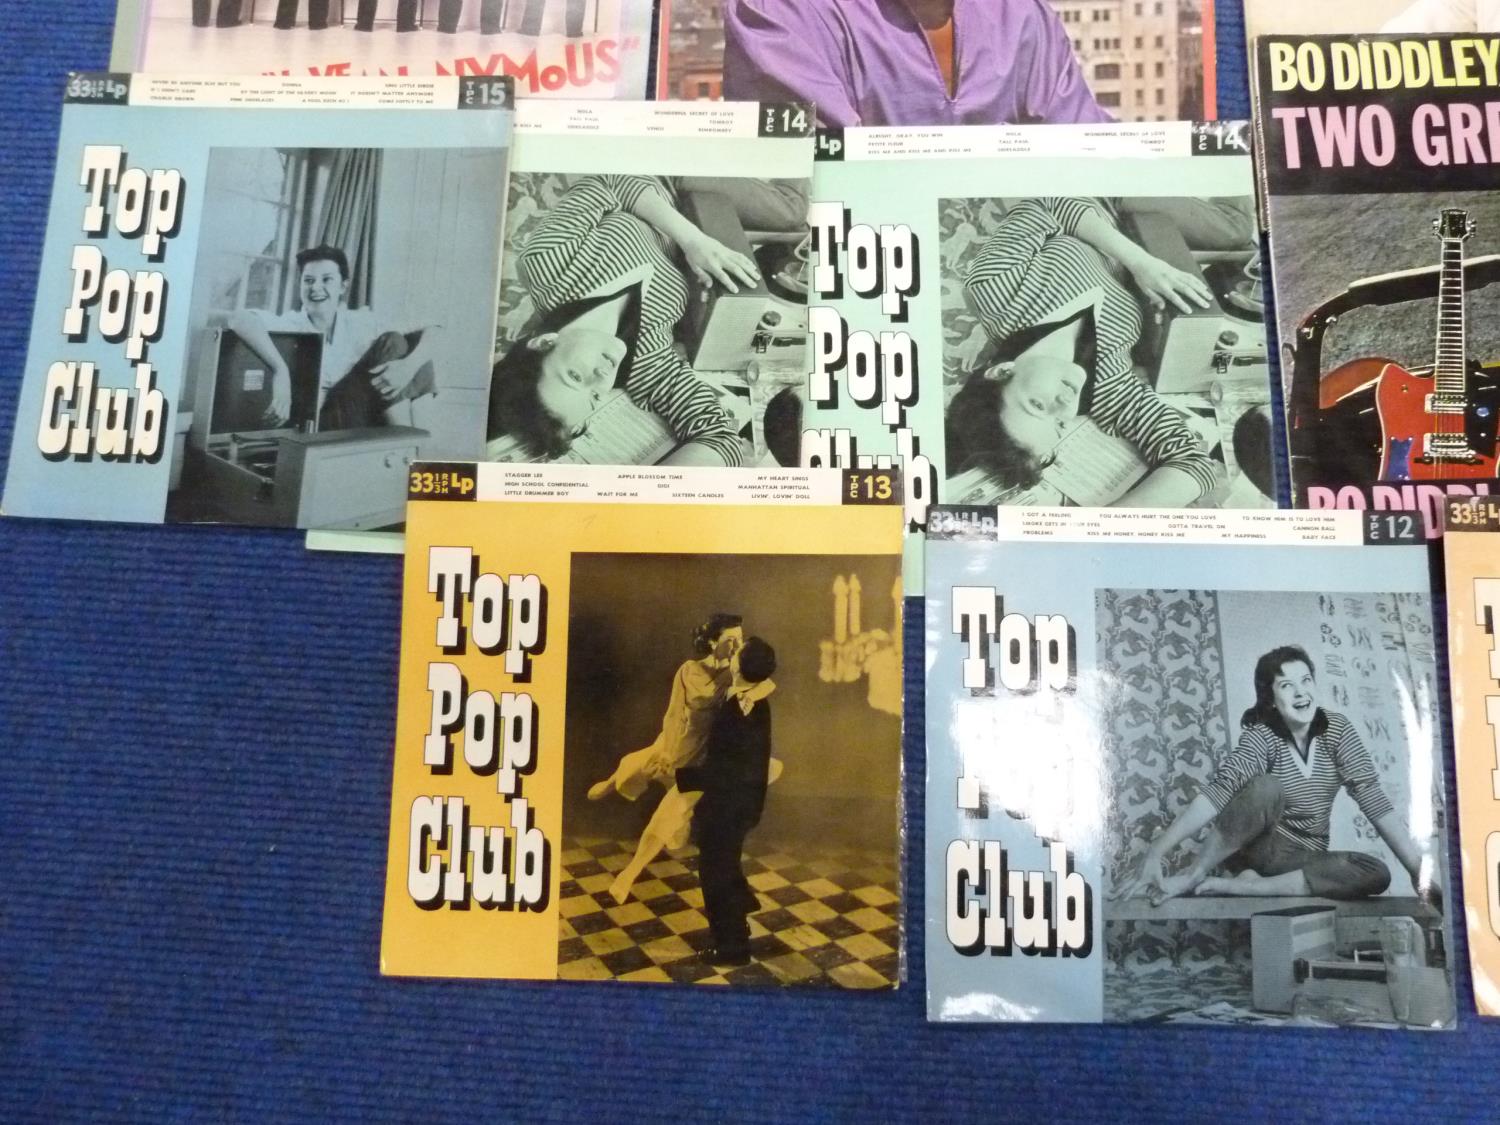 Seven TOP POP CLUB 10inch LP's with Matt Munro (sic) and Jean Campbell also Sixteen UK LP's to - Image 3 of 6